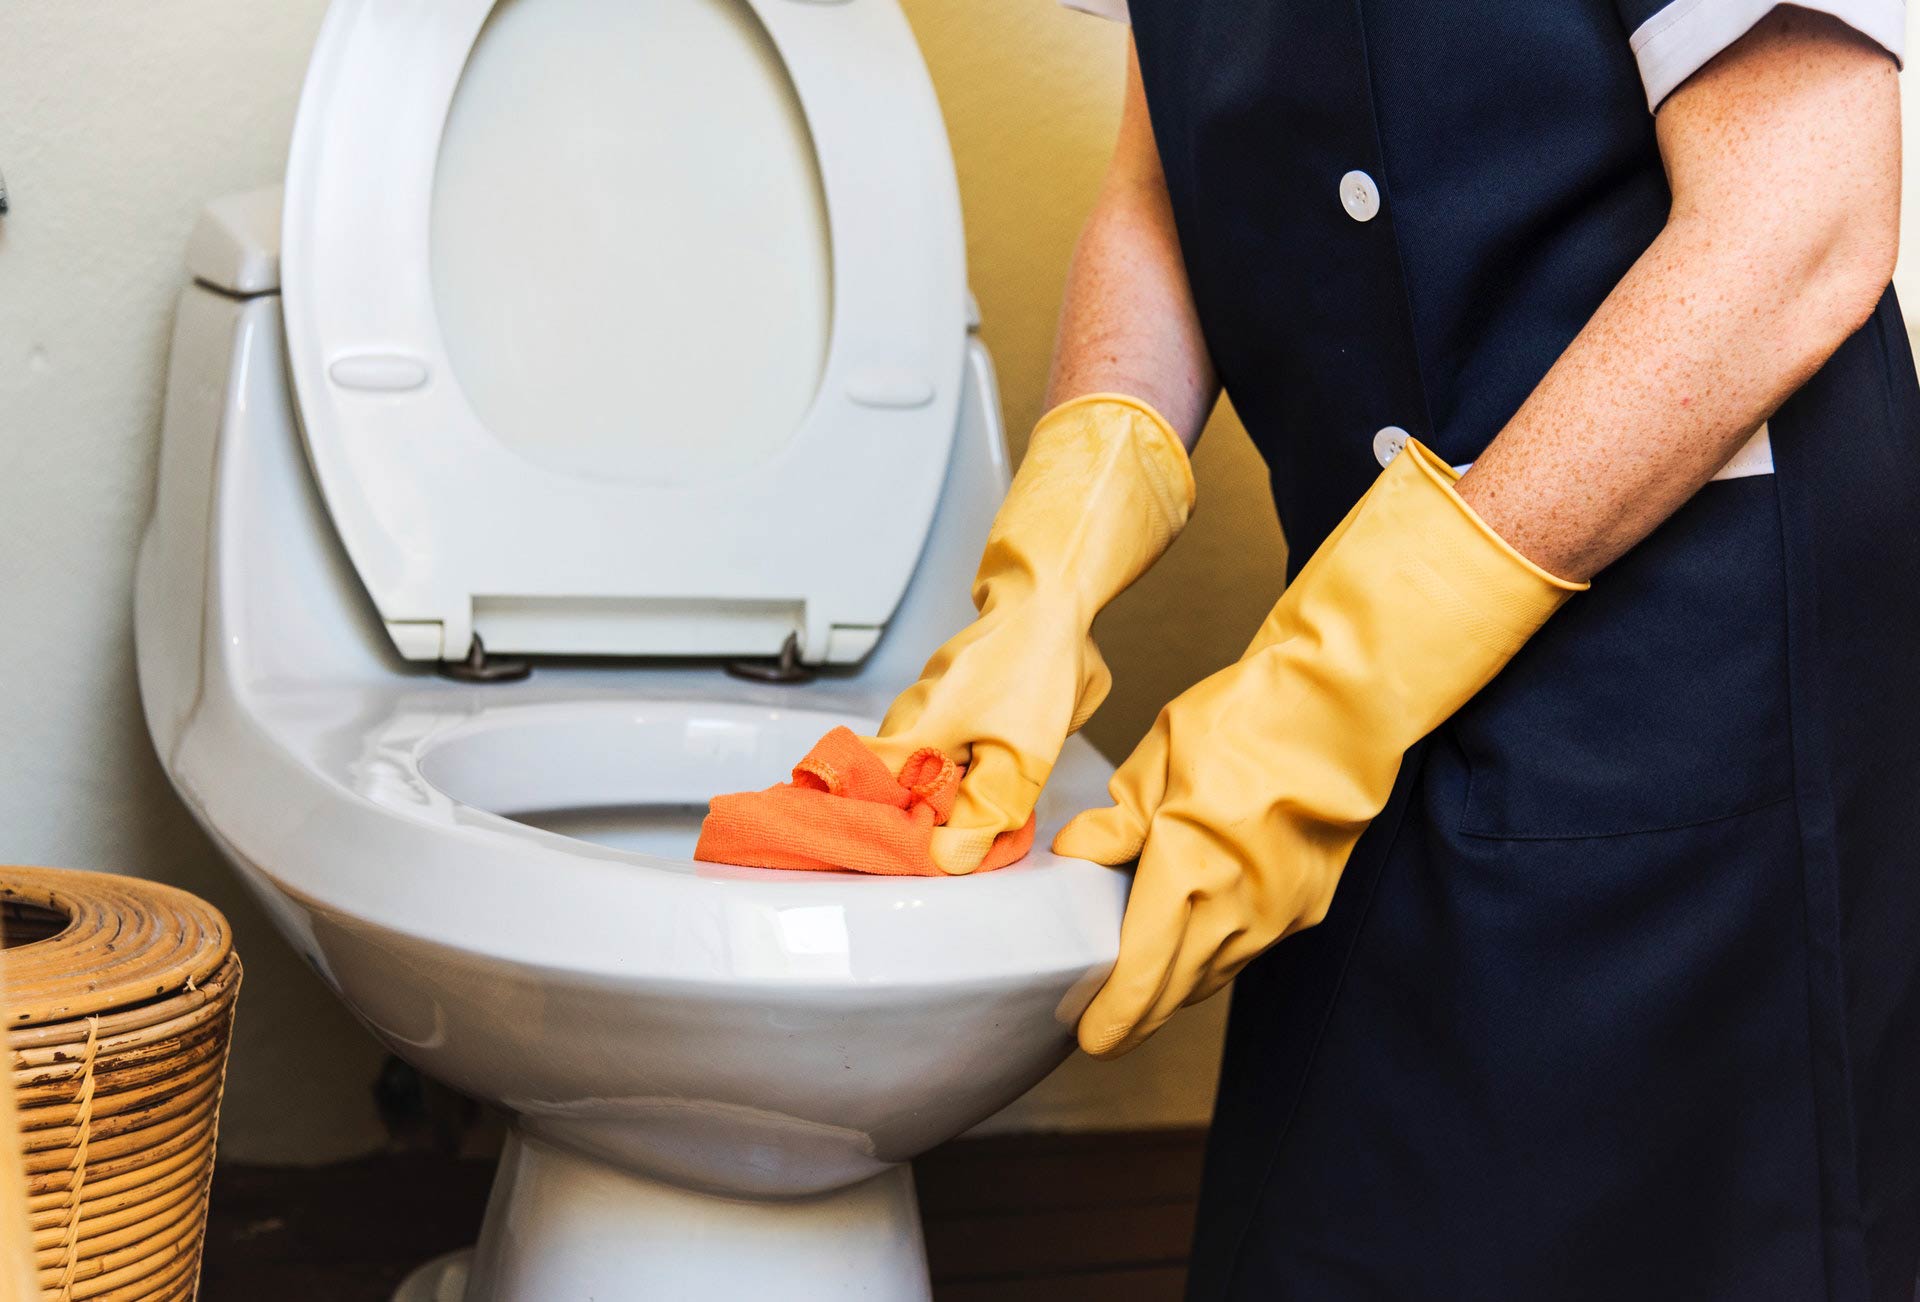 Adult cleaning a toilet bowl, Source: rawpixel.com from Pexels